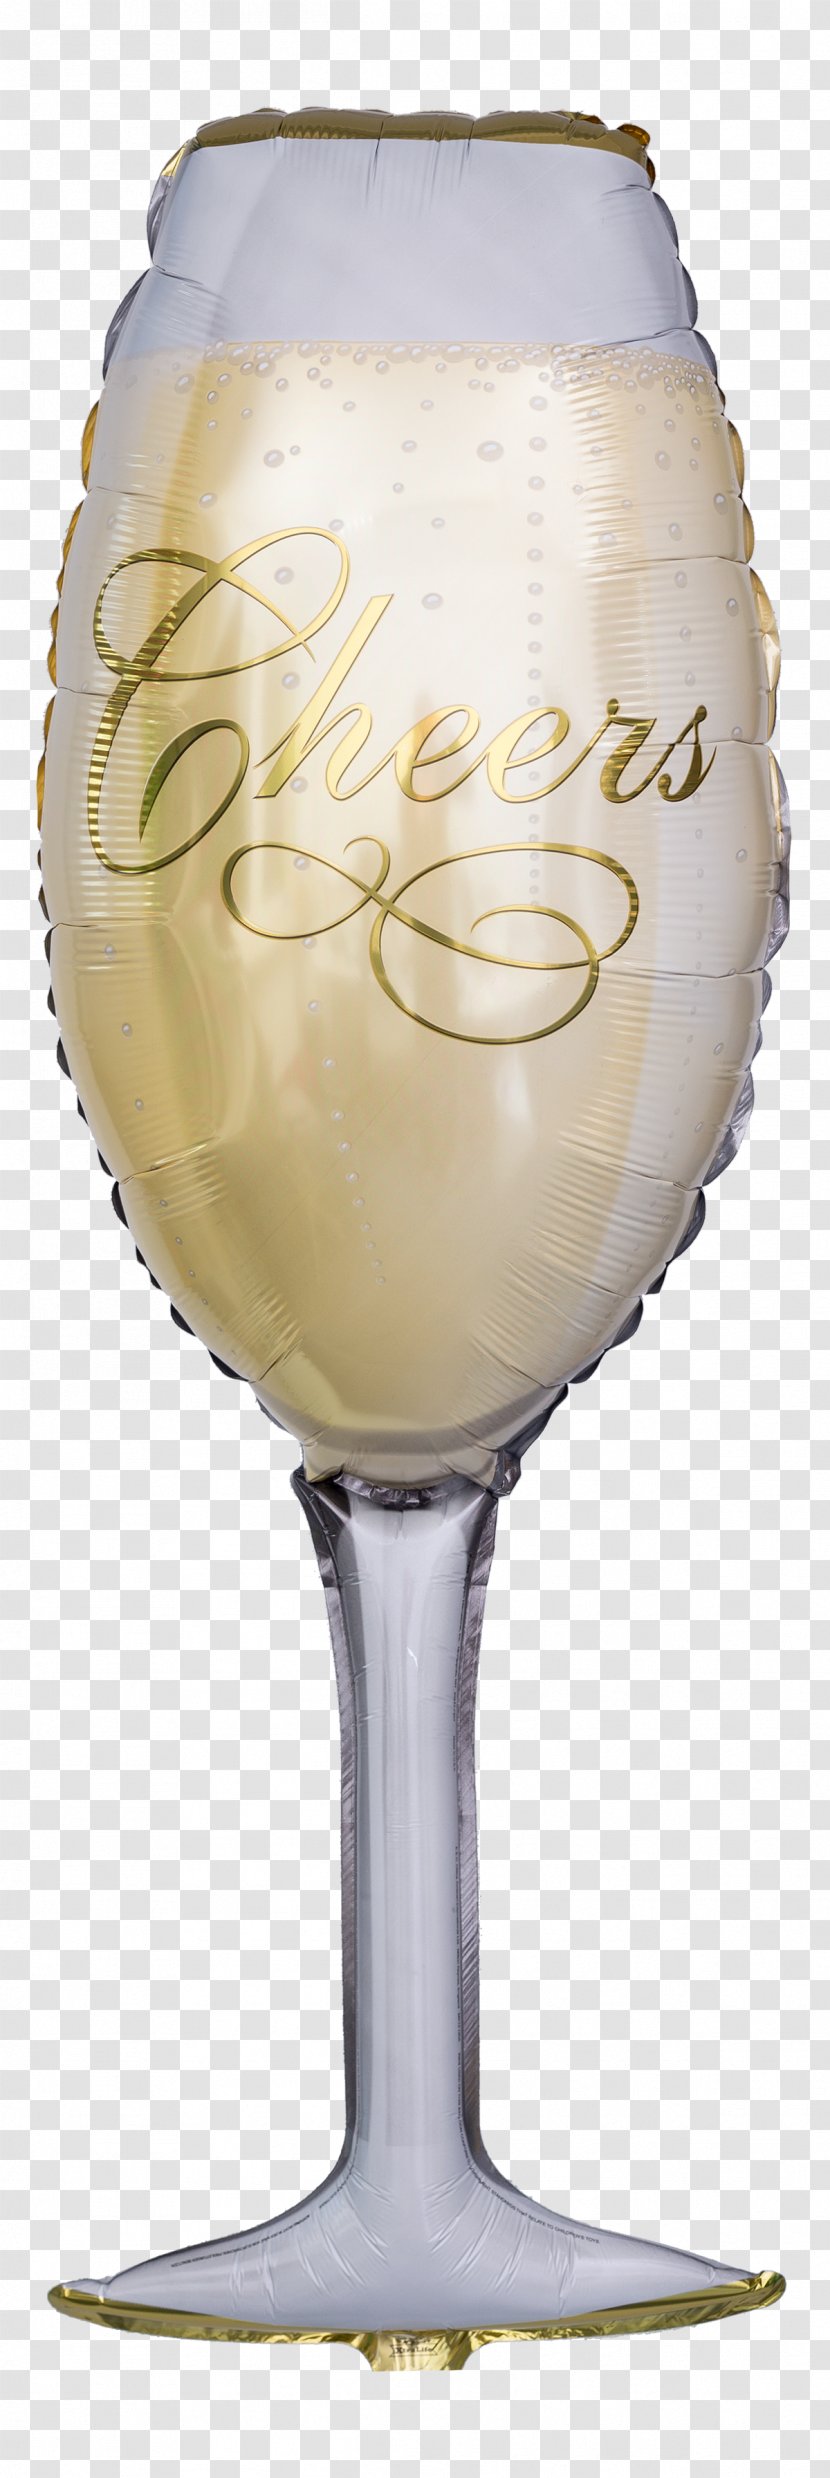 Wine Glass Toy Balloon Champagne Mail Transparent PNG